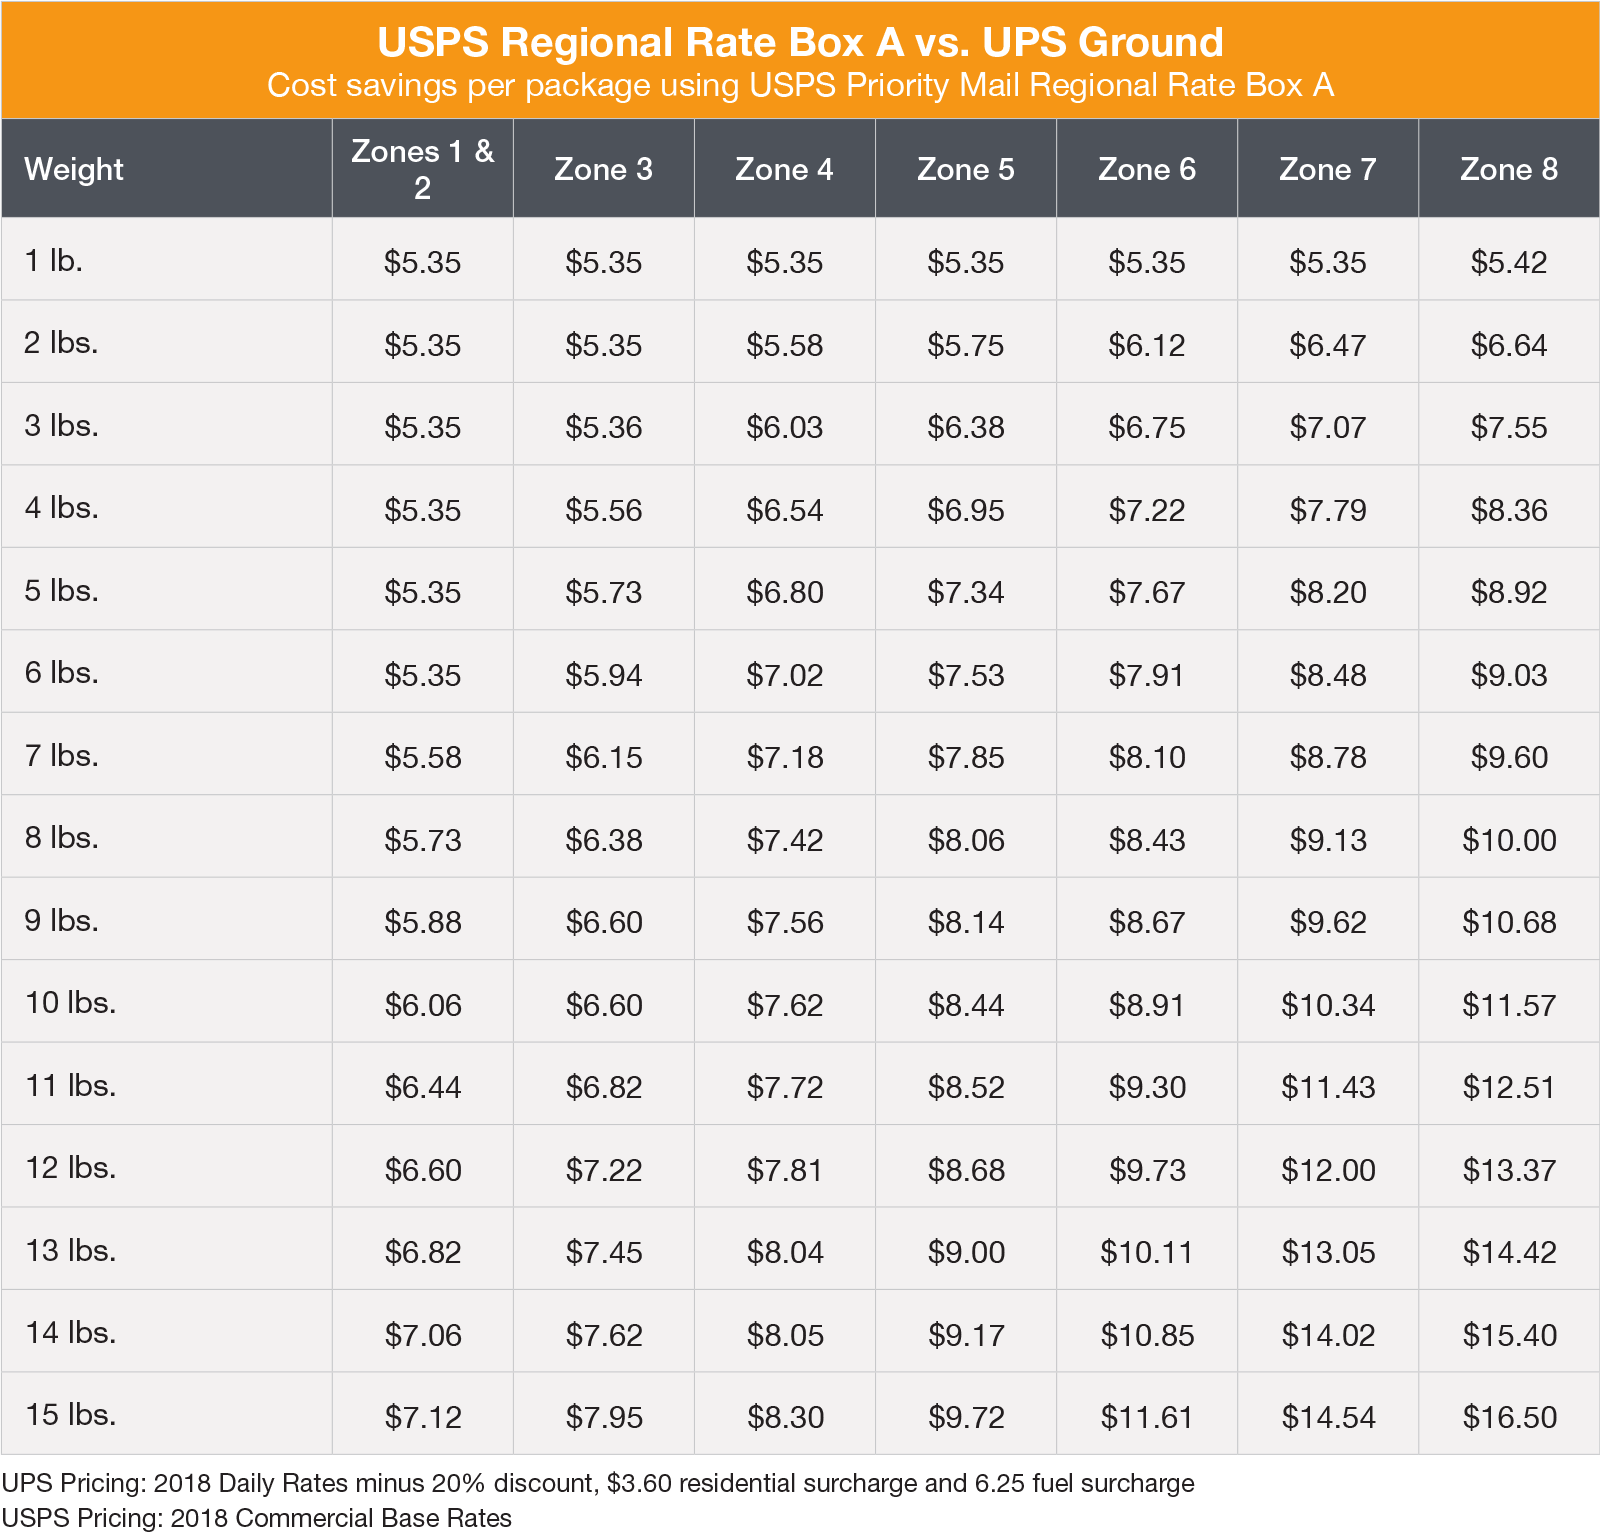 Chart showing savings when using USPS Regional Rate Box A versus UPS Ground